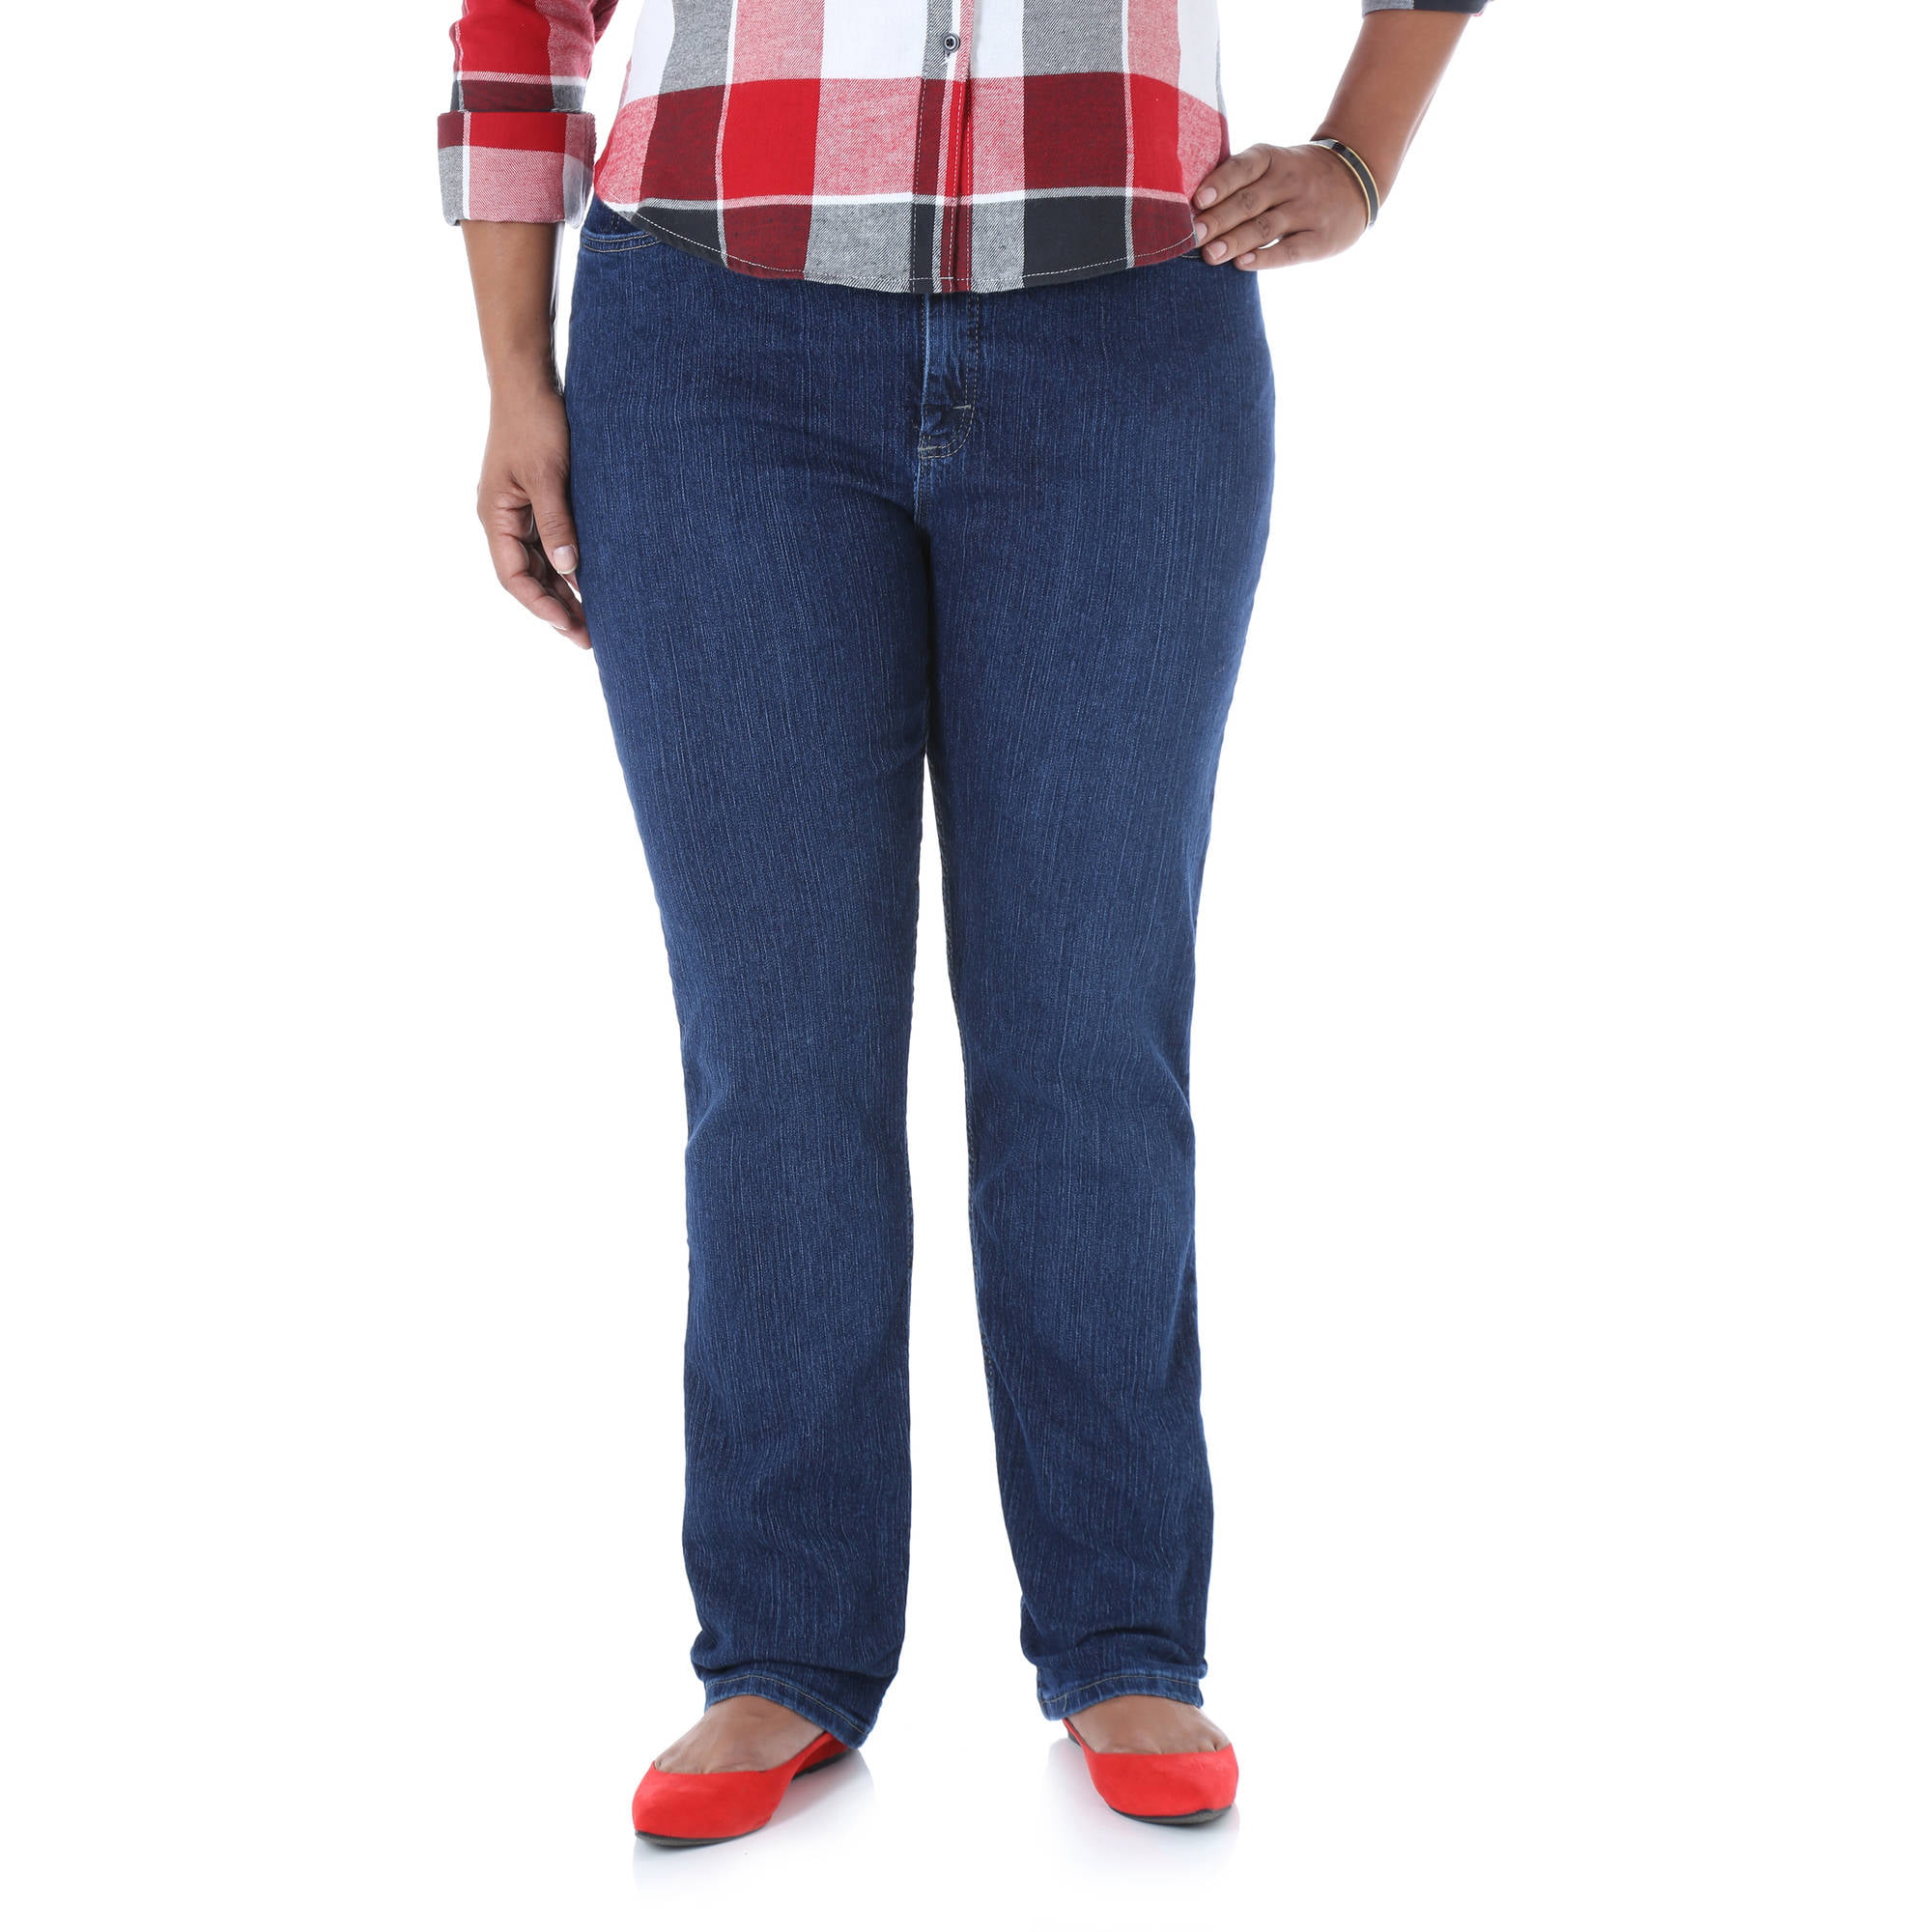 lee rider jeans plus size tall